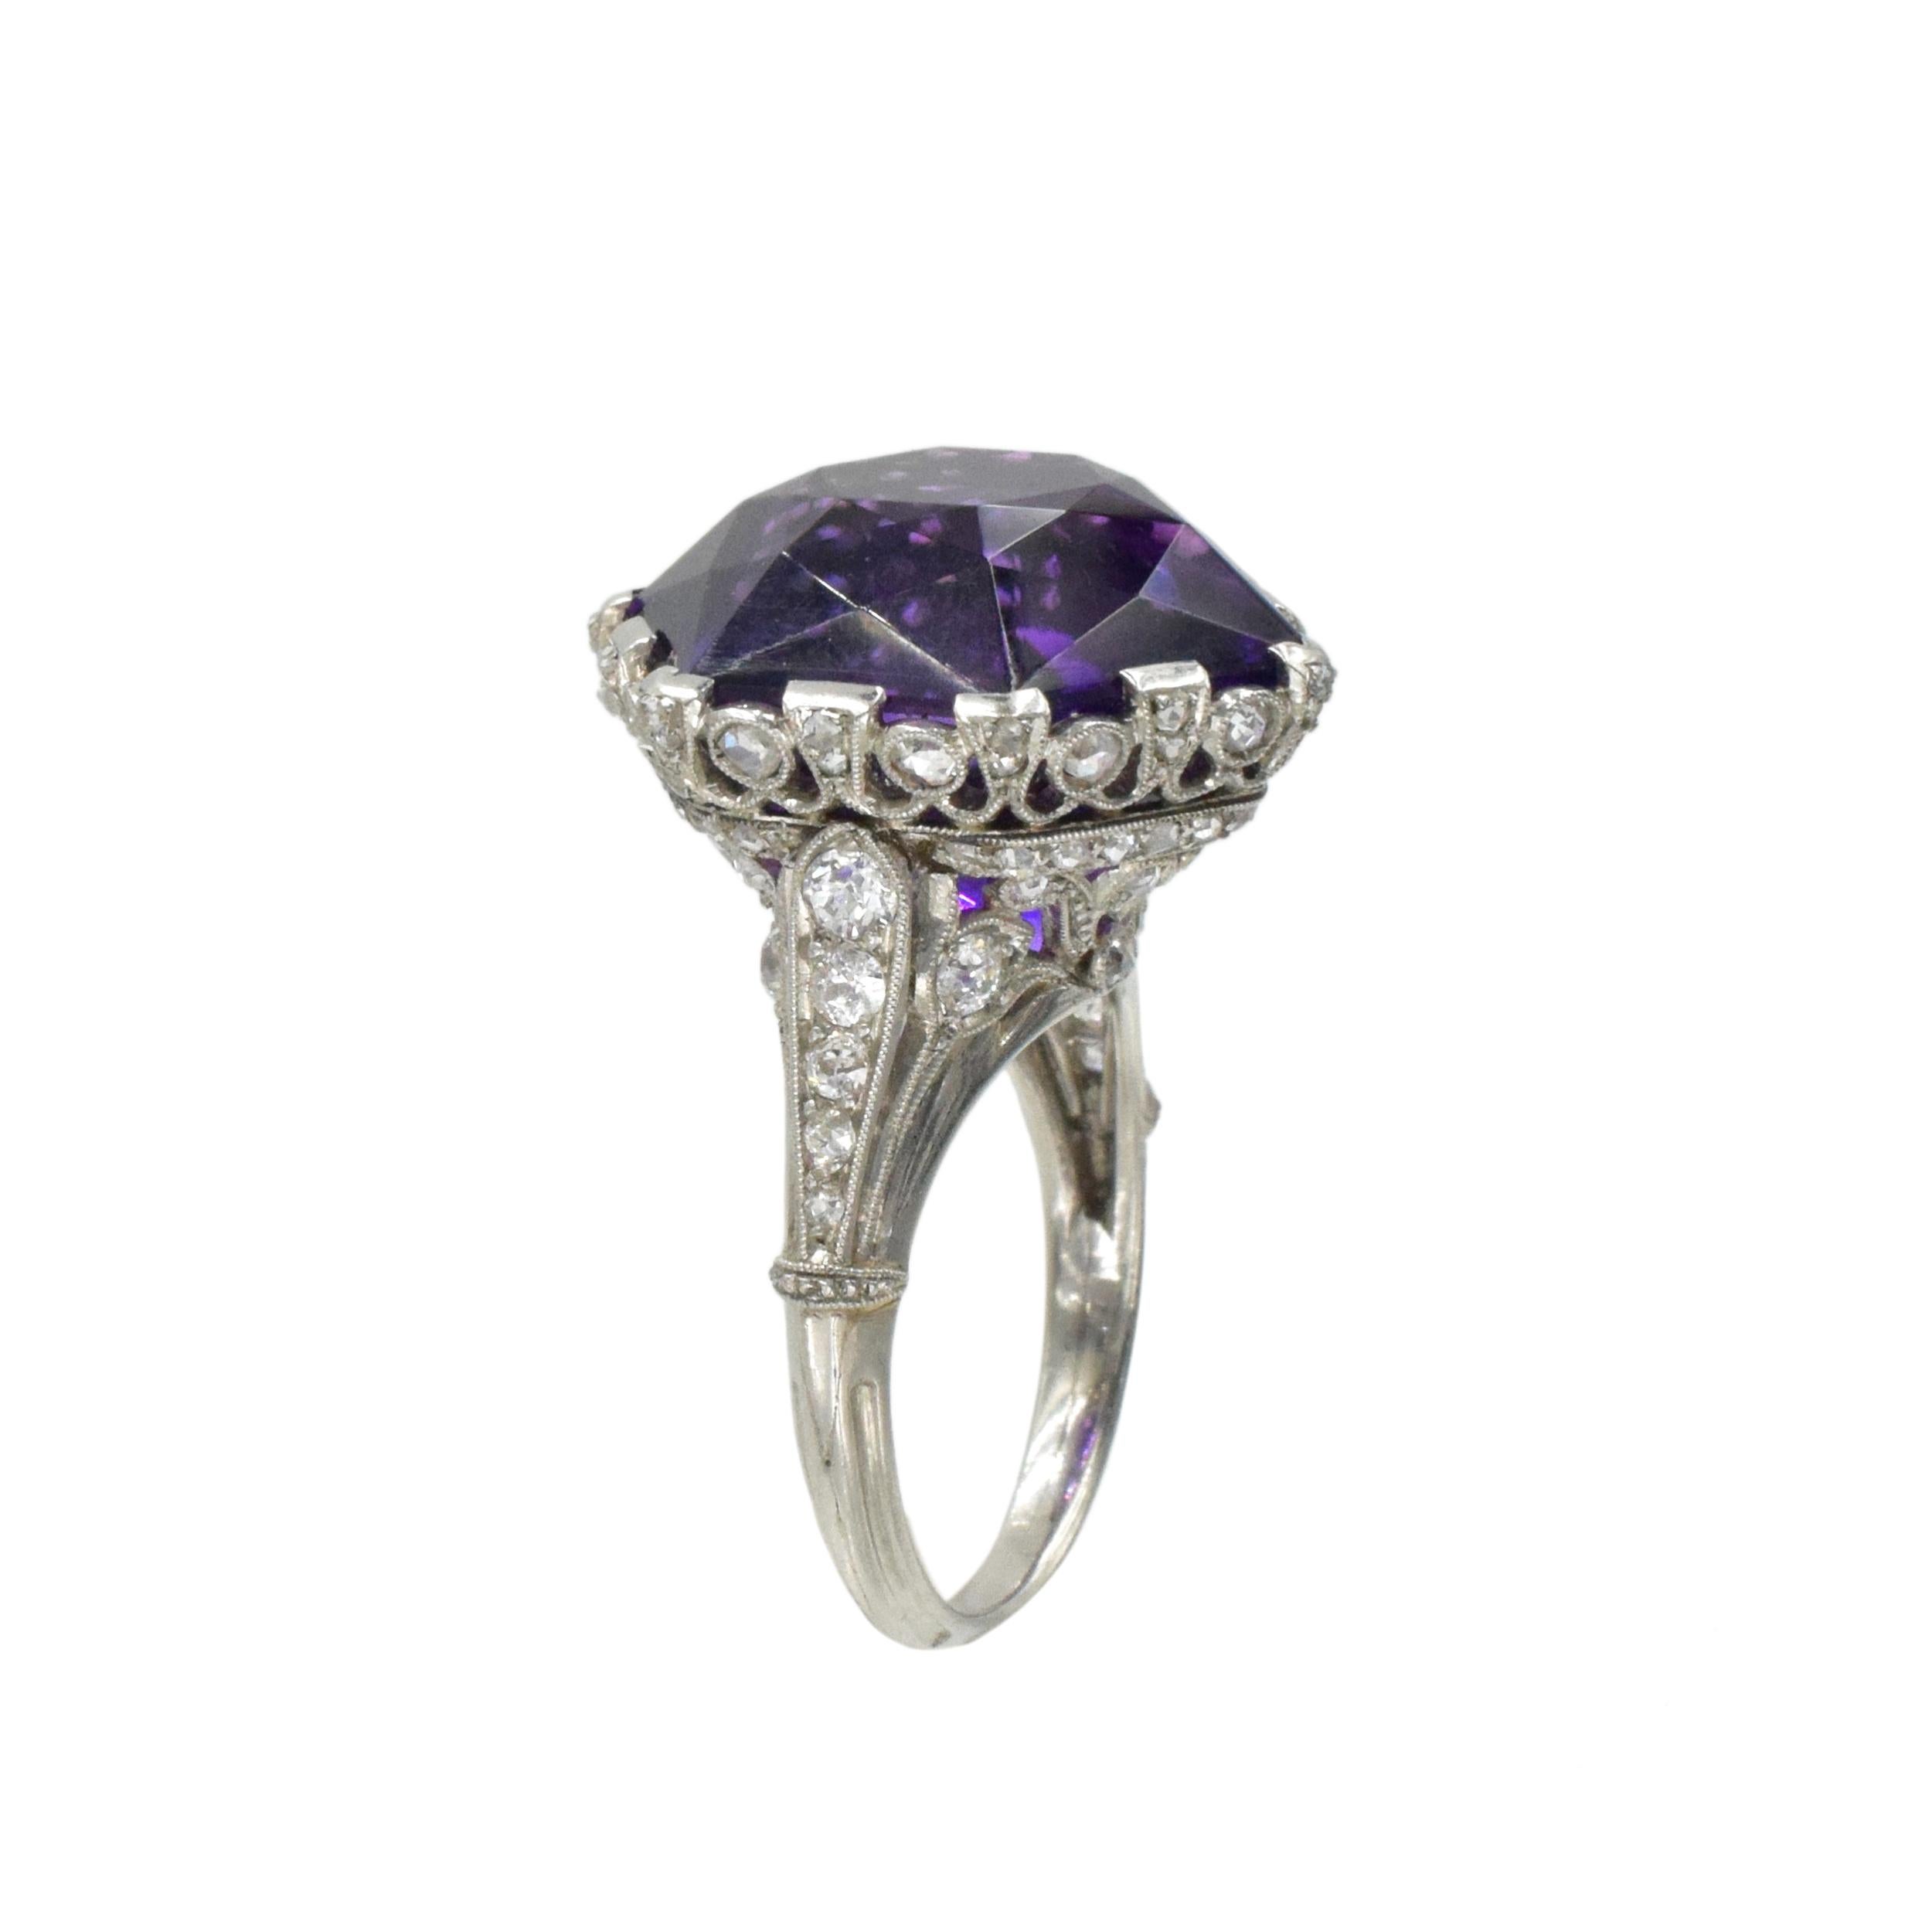 French Amethyst and Diamond Ring This ring is featuring a hexagonal mixed-cut
amethyst with weight of approximately 26.60ct, embellished   by rose-cut and old European-cut
diamonds with a total weight of approximately 0.85ct, set in platinumopenwork